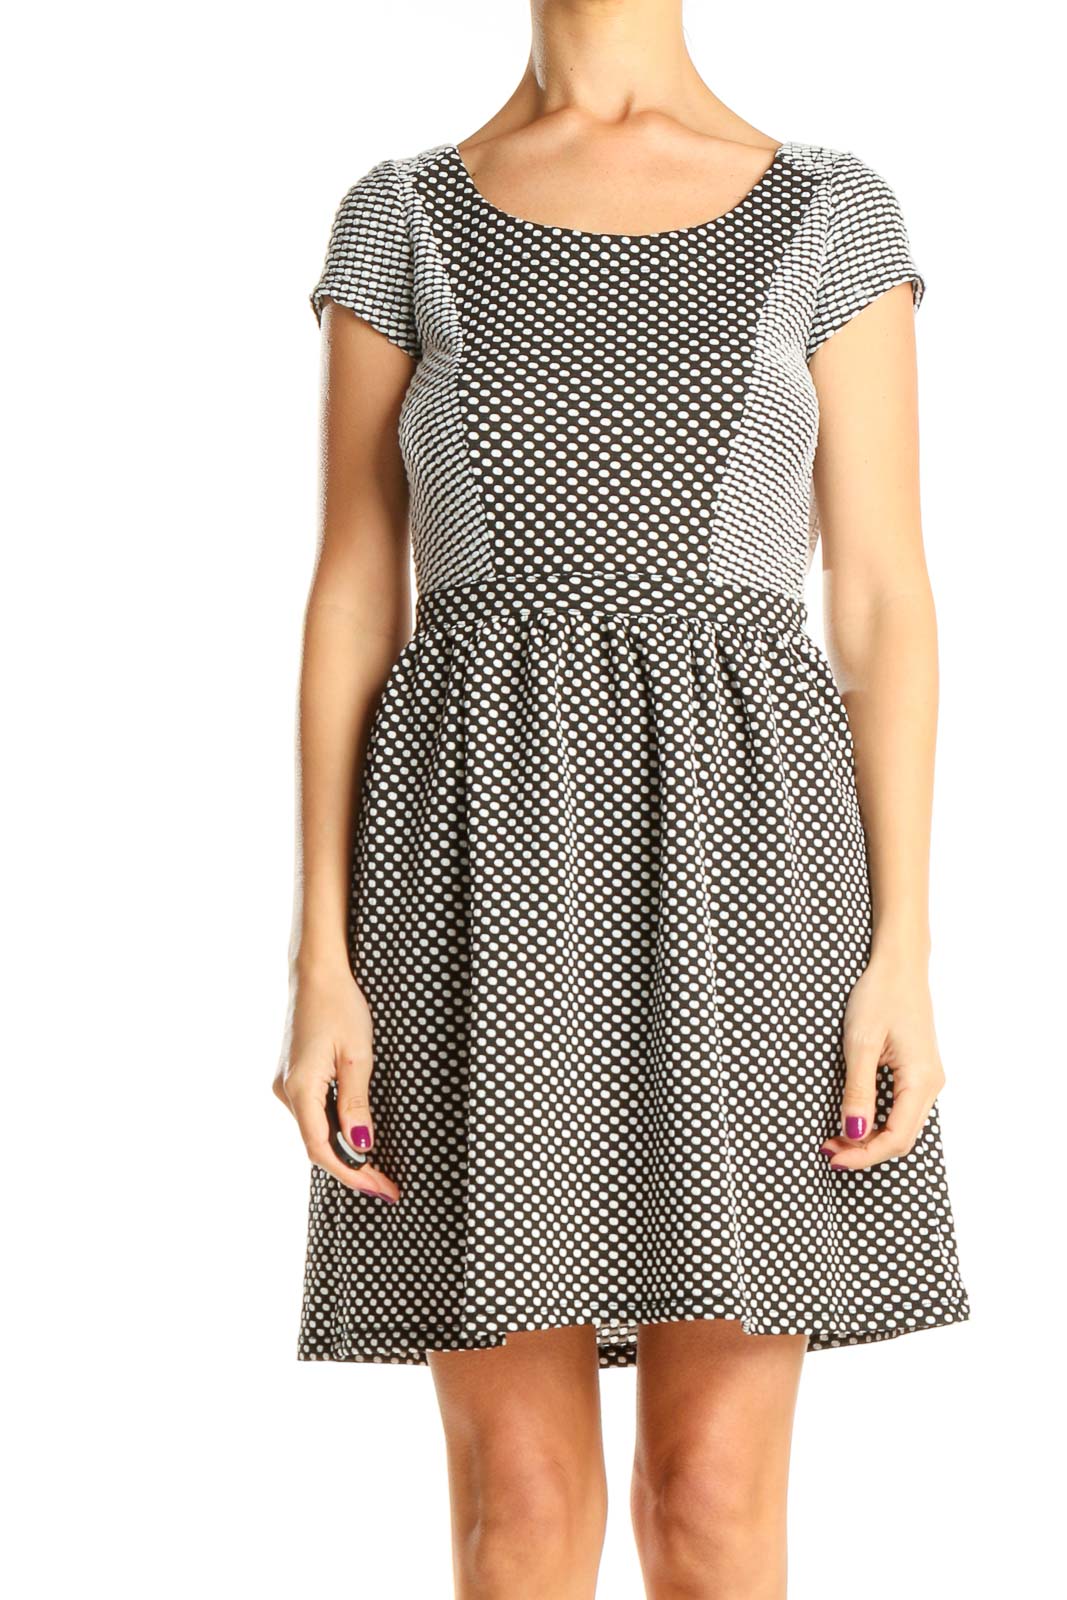 Gray Polka Dot Classic Fit & Flare Dress Front